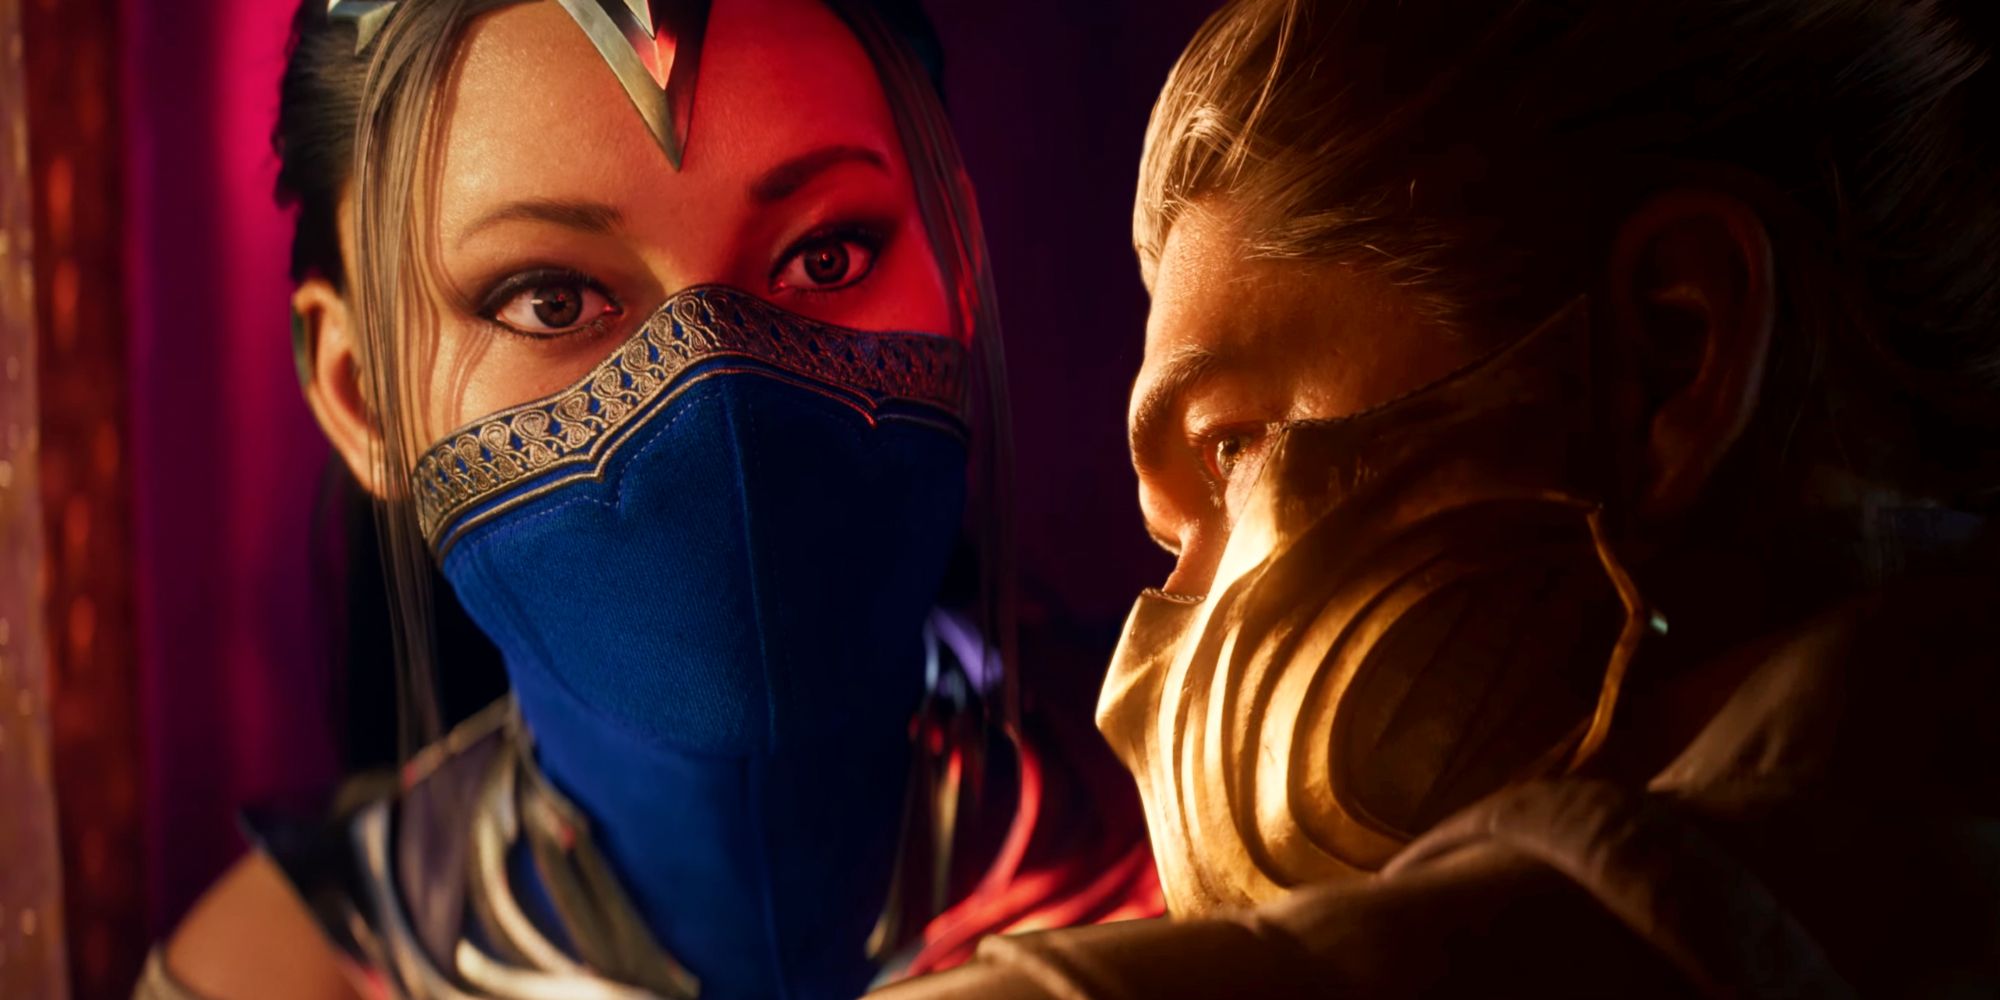 Kitana and Scorpion from Mortal Kombat 1's trailer, edited together. Kitana is looking toward and past the camera, while Scorpion is glancing over his shoulder with back turned.